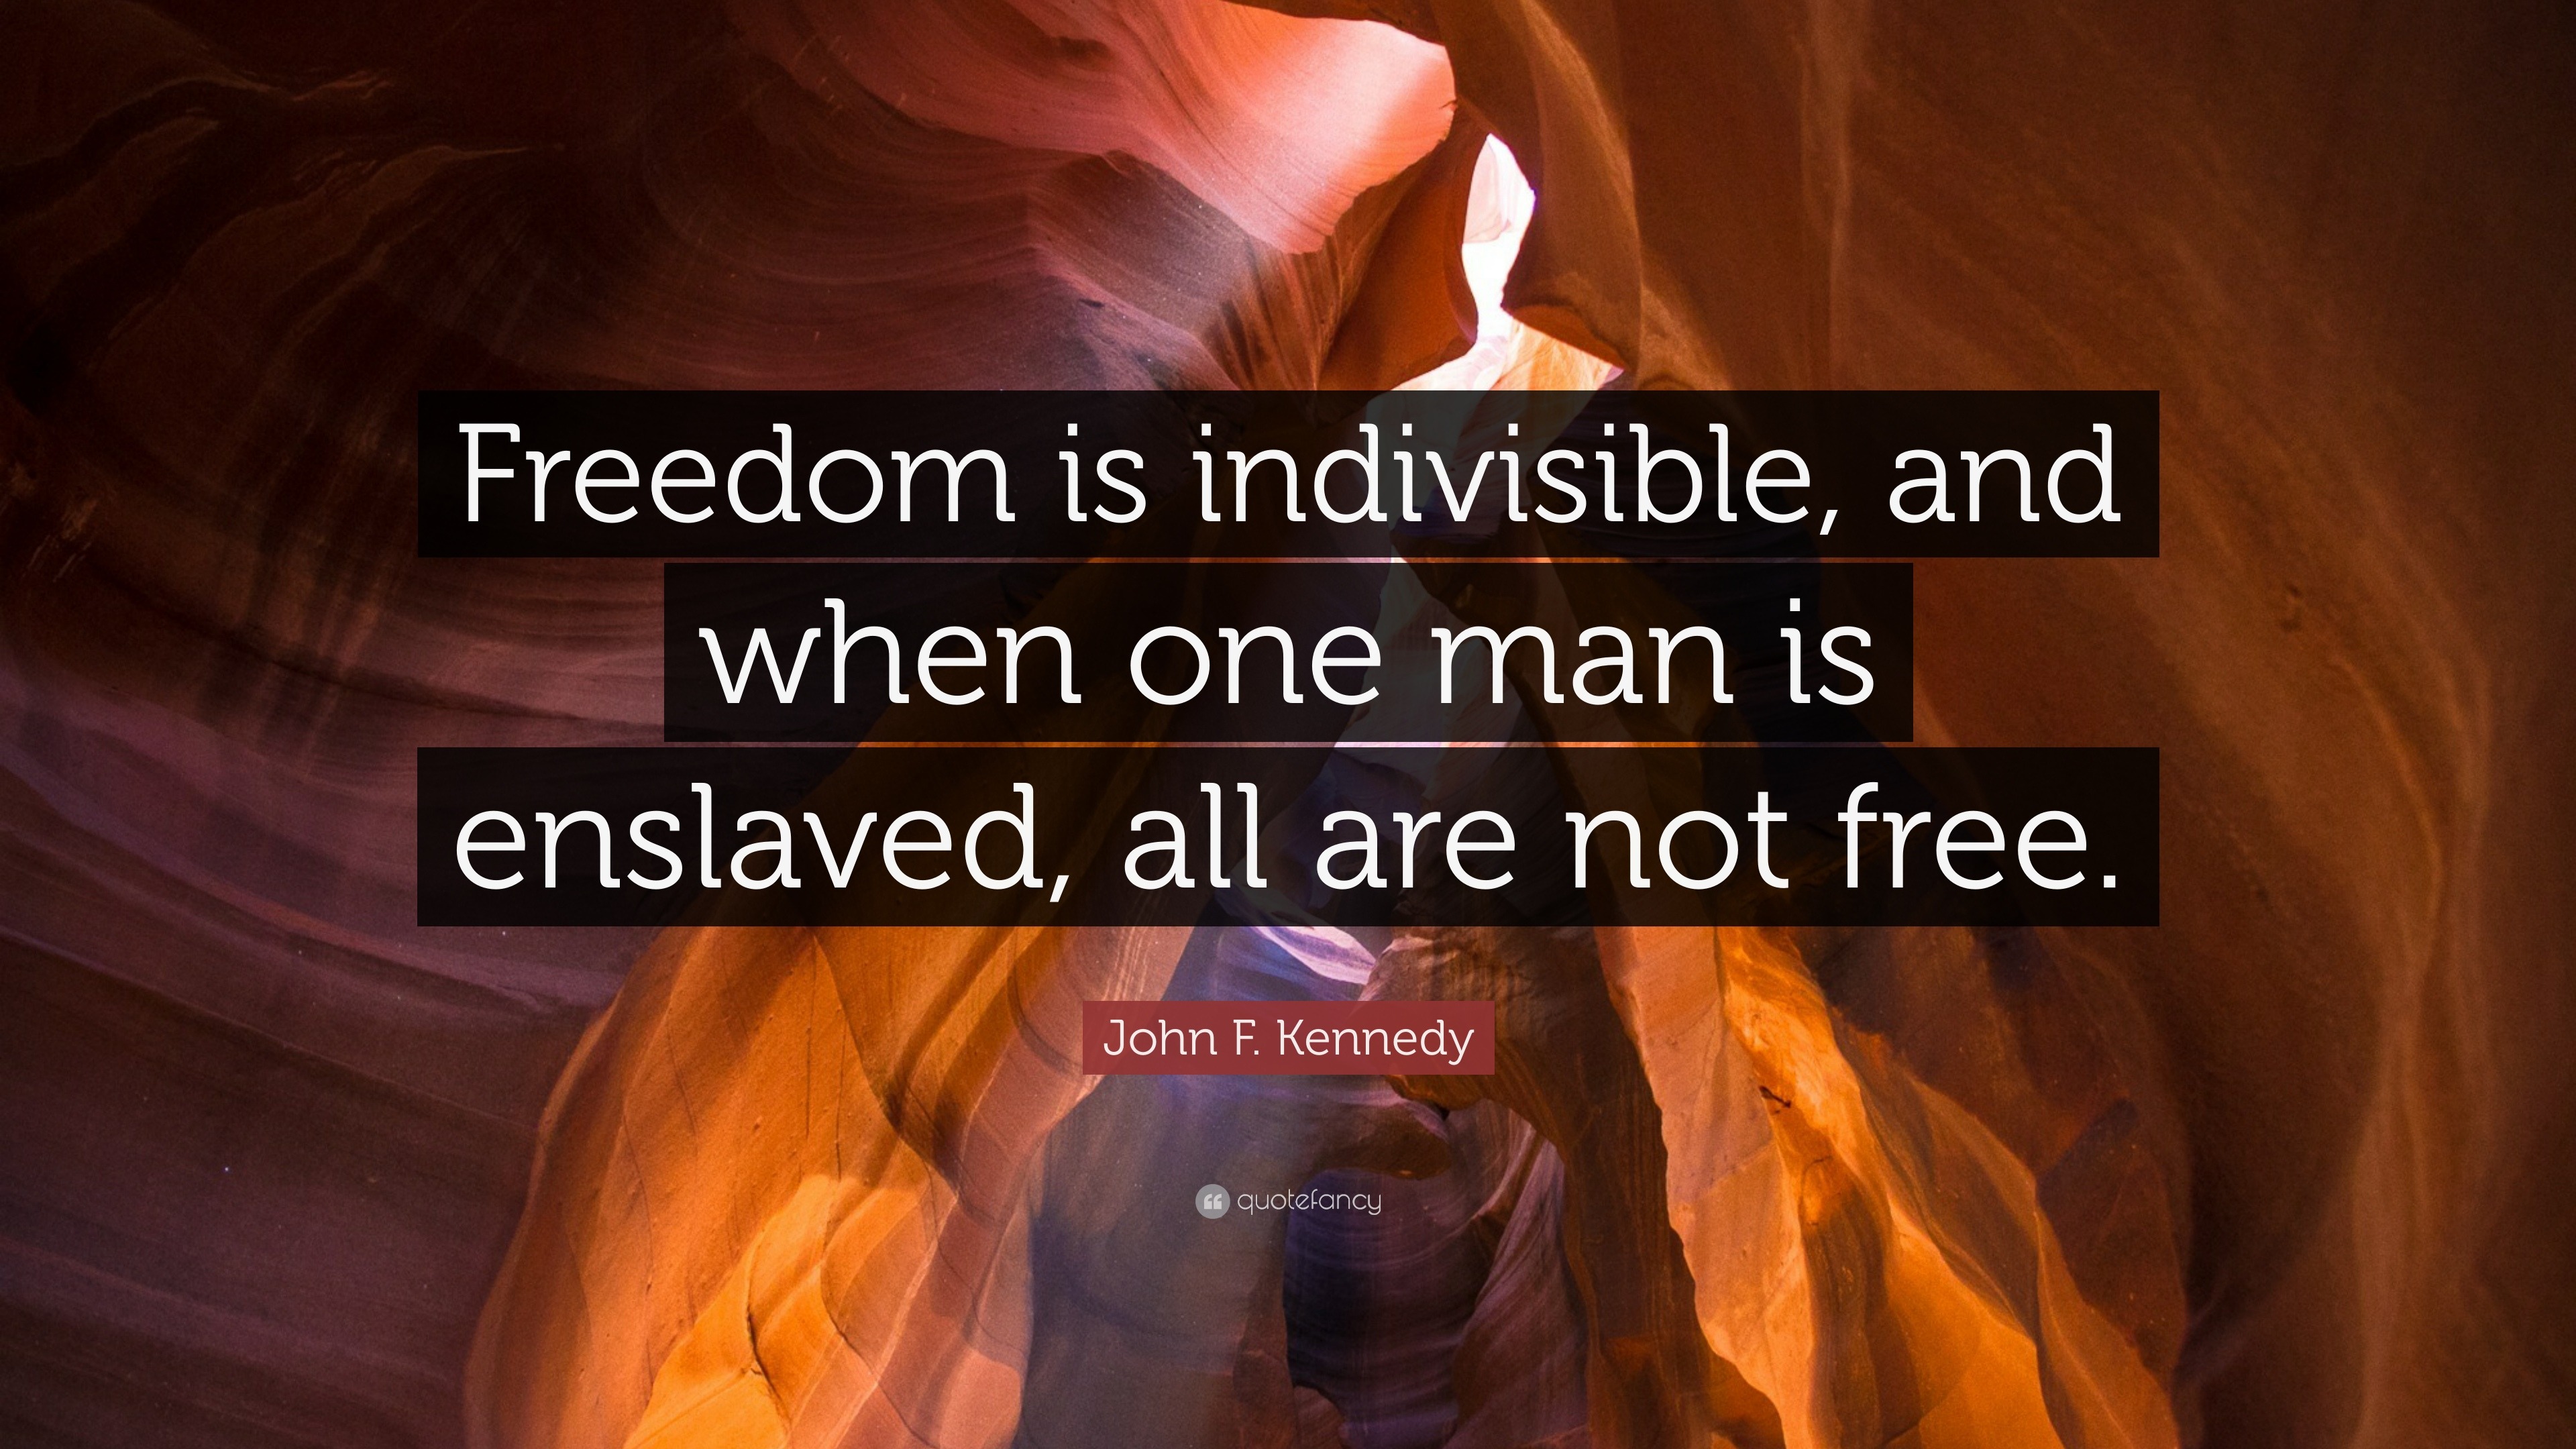 John F. Kennedy Quote: “Freedom is indivisible, and when one man is ...